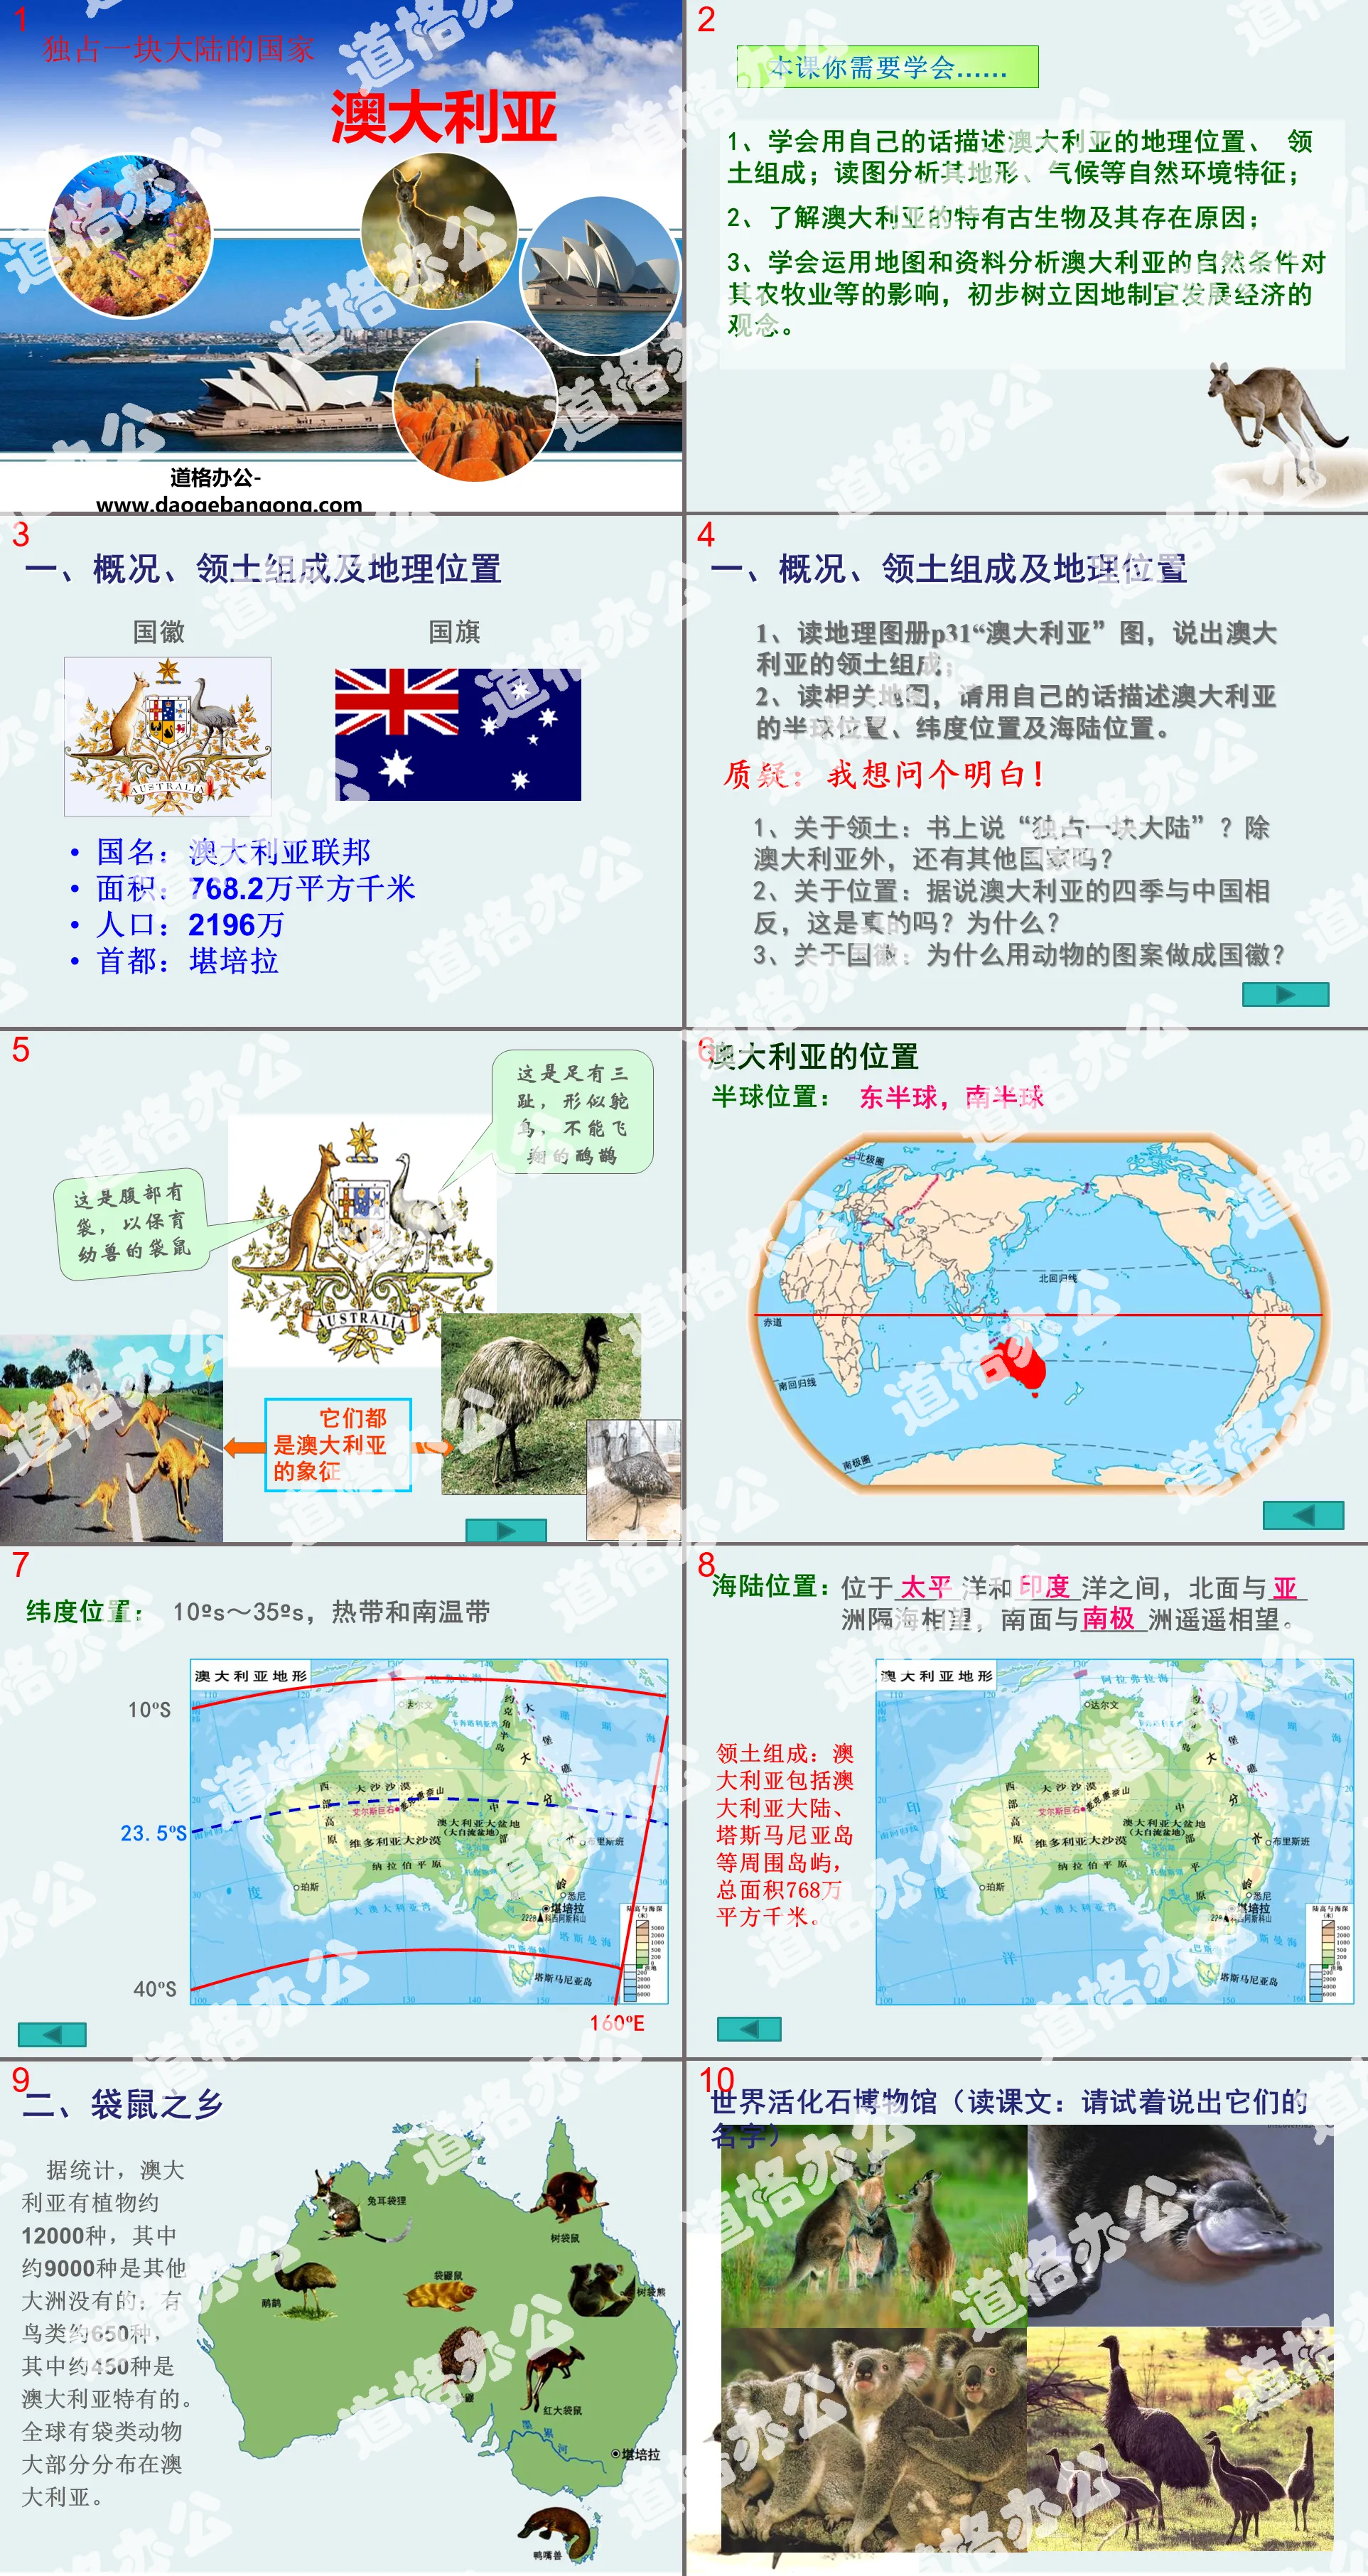 "A country that occupies a continent alone—Australia" PPT courseware download